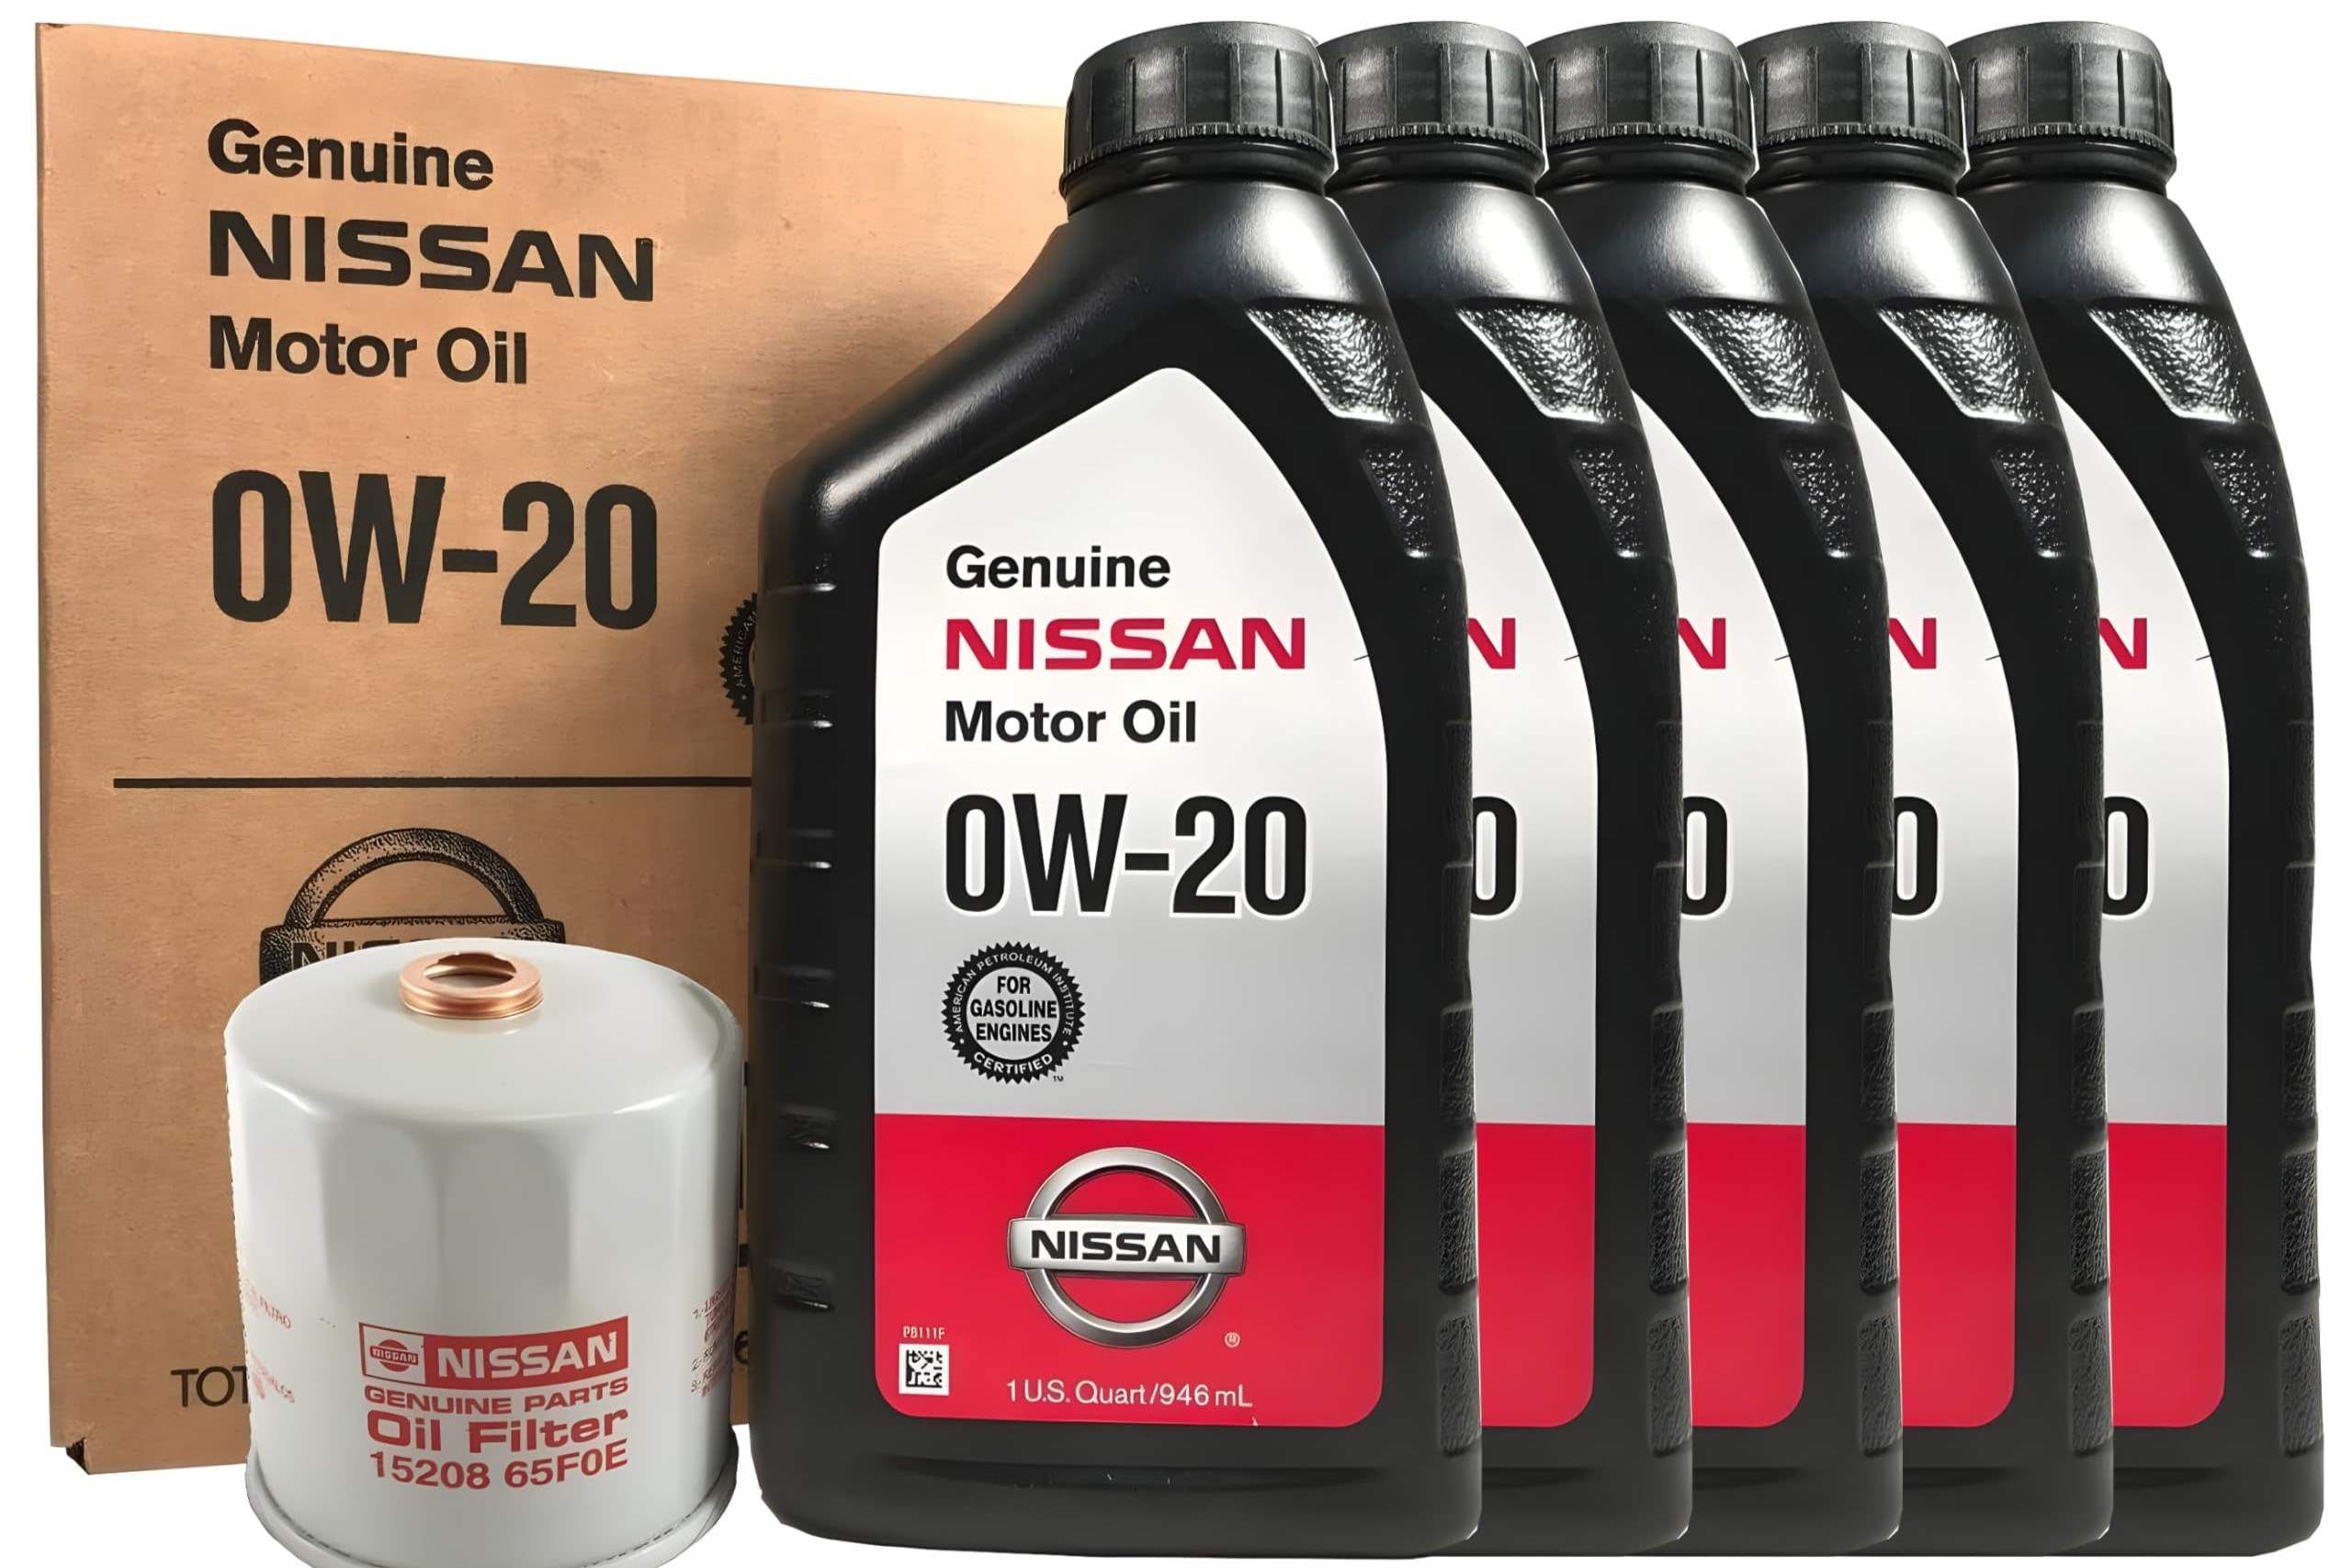 Boost Your Car's Performance With 0W-20 - The Ultimate Upgrade!